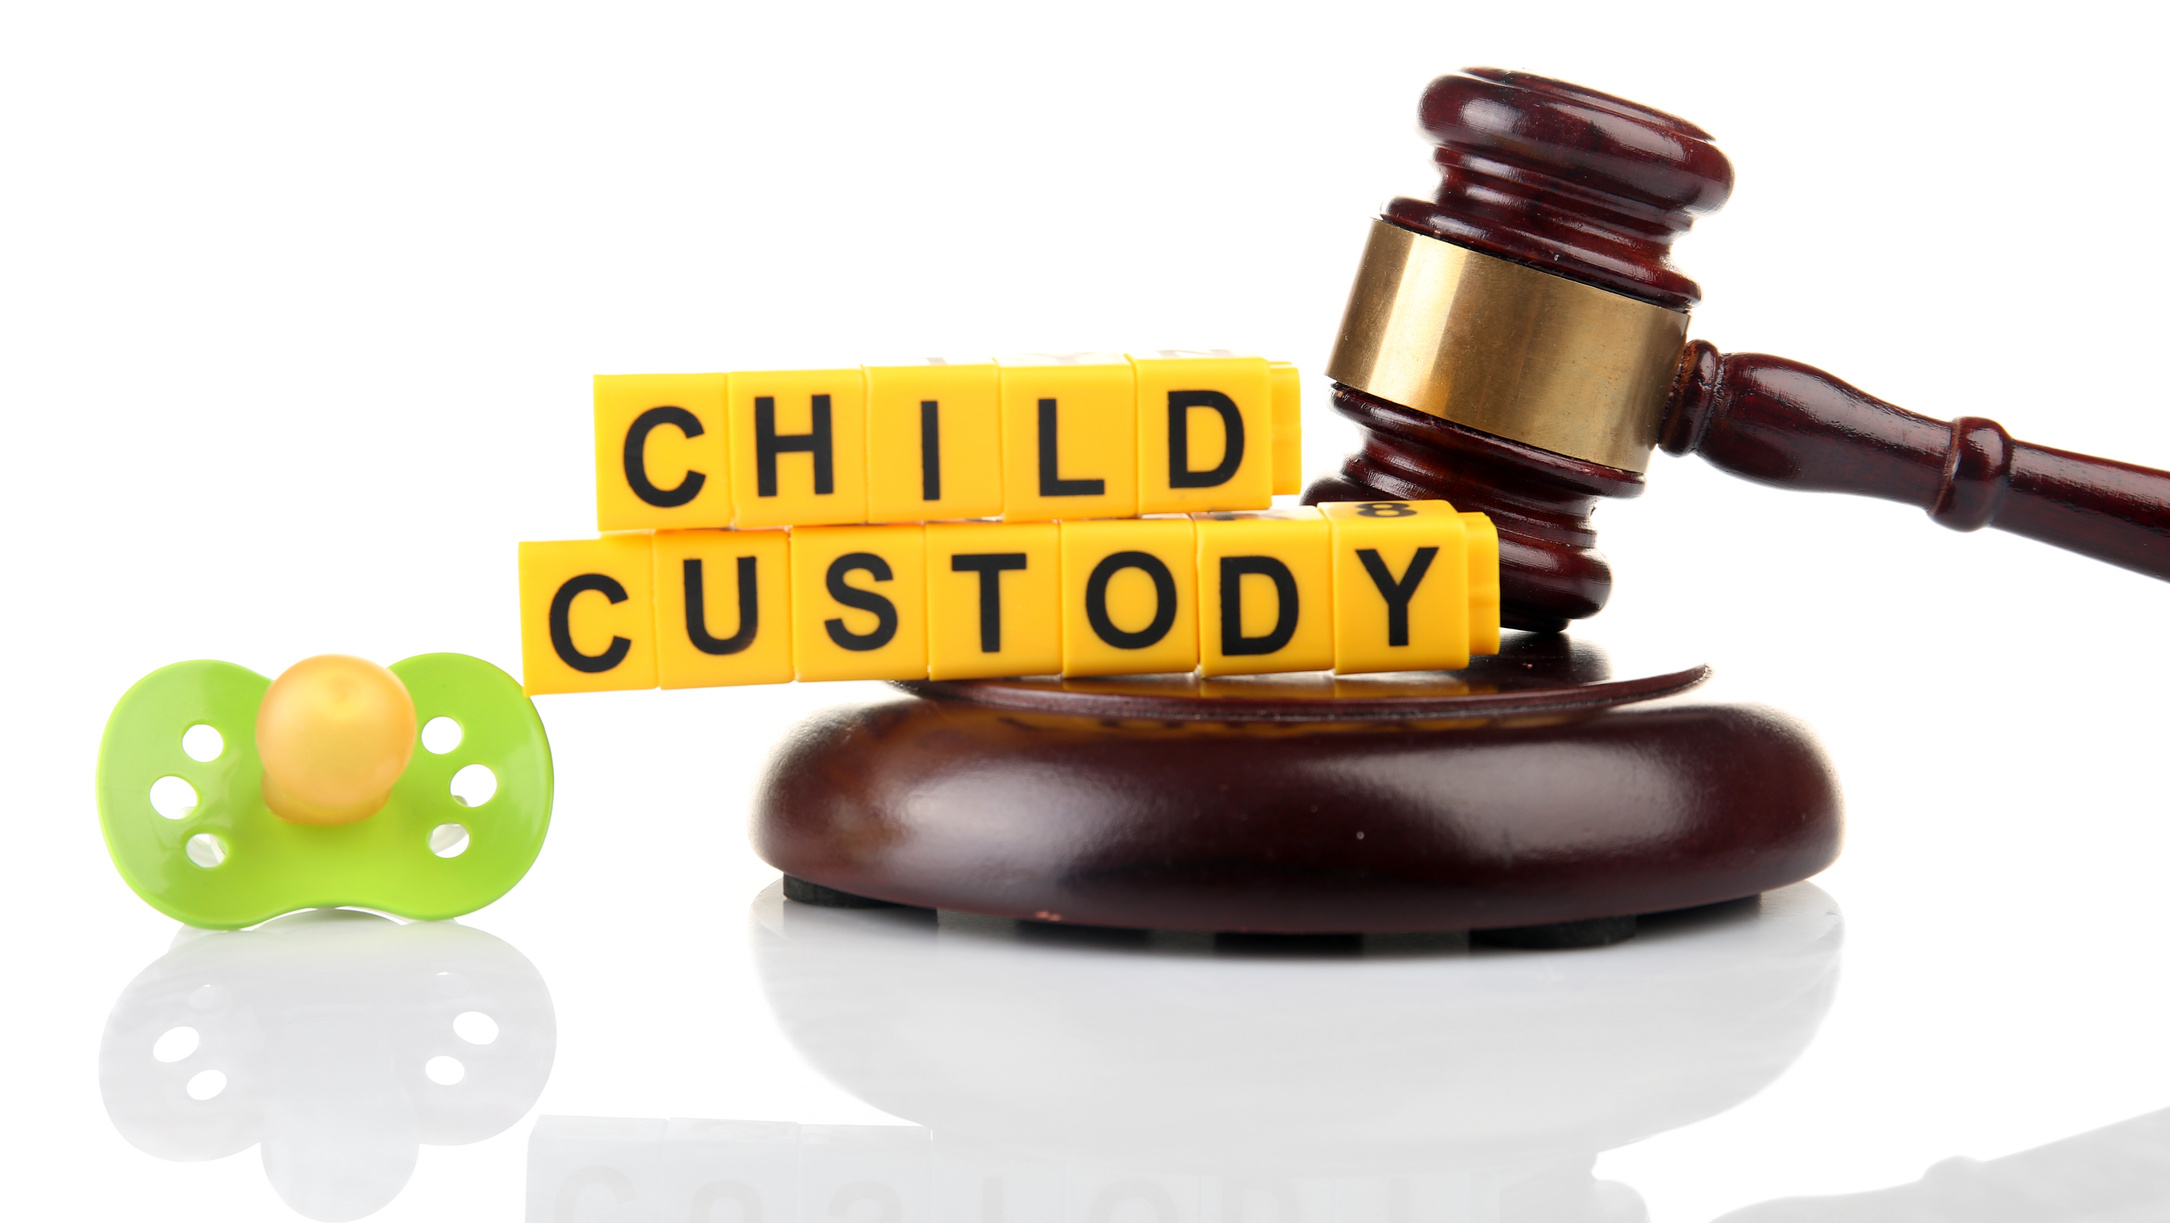 Child Custody and Divorce Concept on White Background